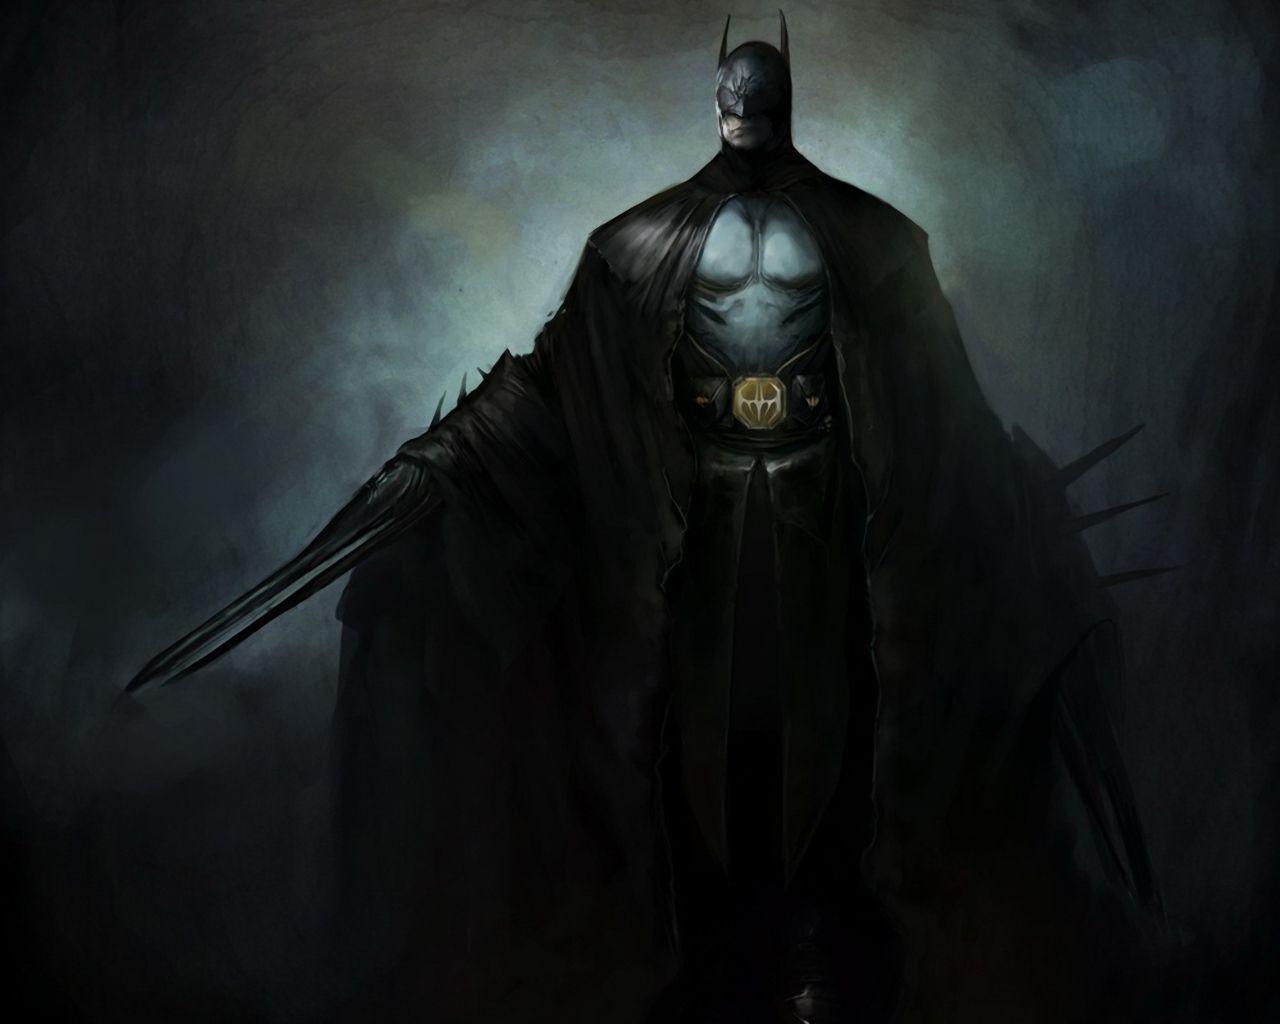 Check this out! our new Batman wallpapers